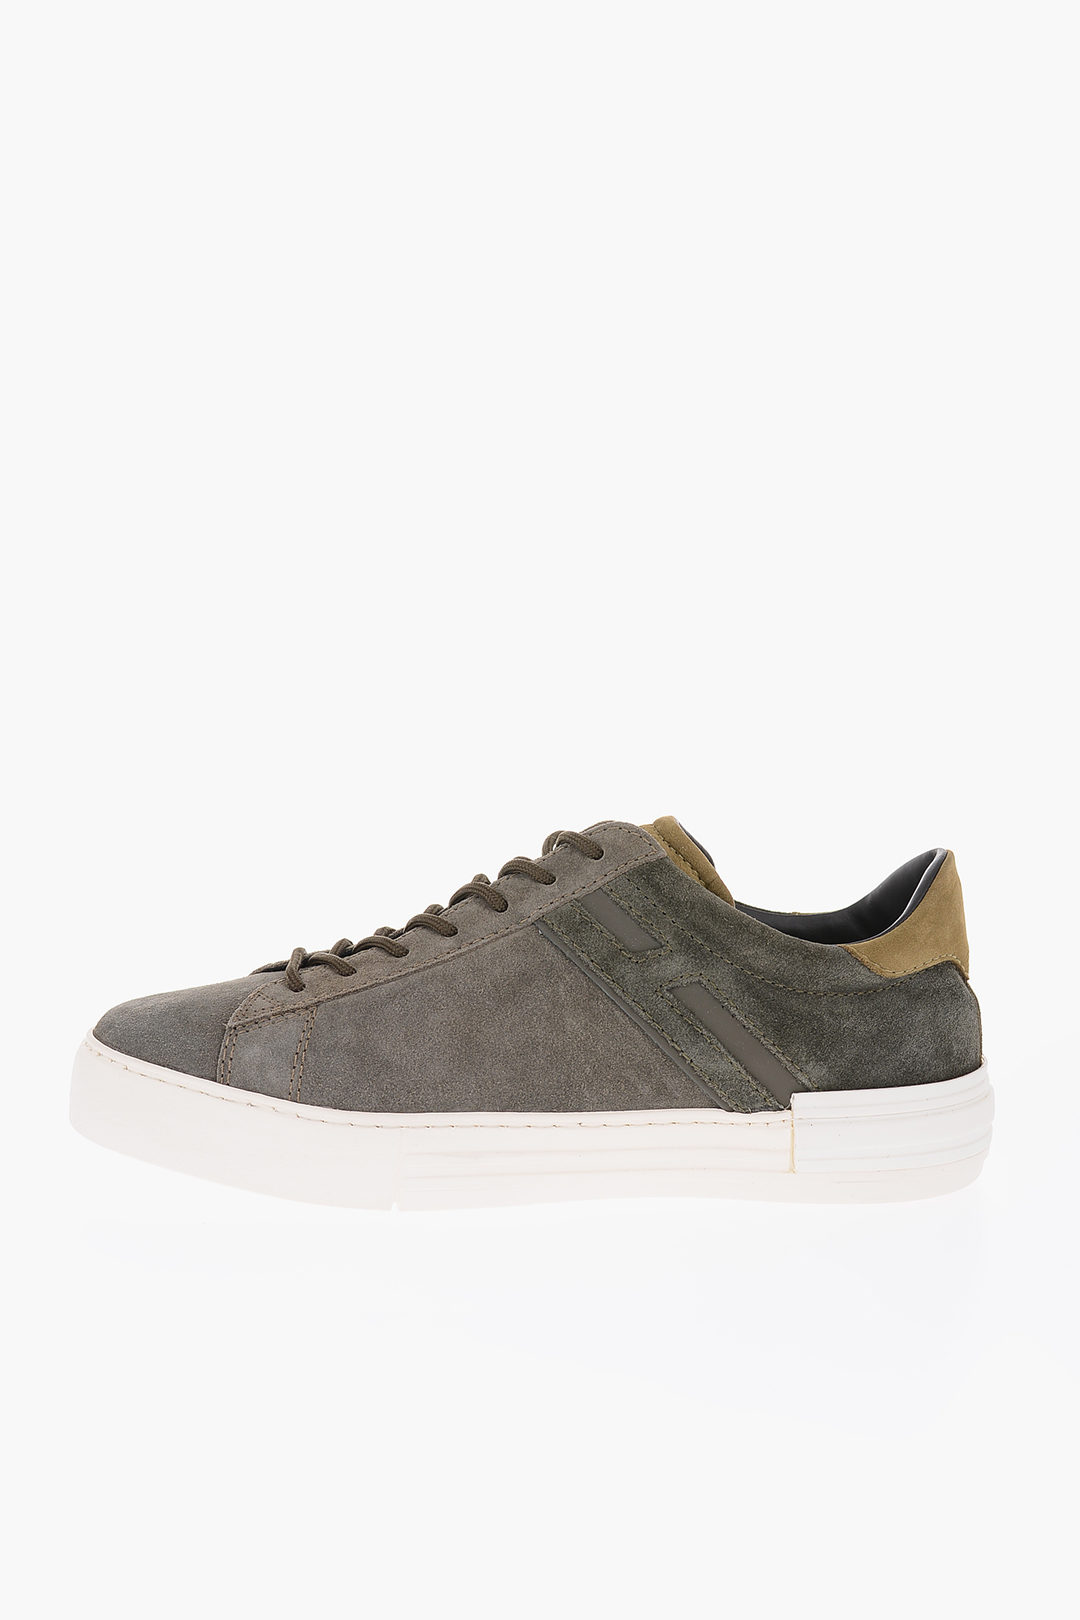 Hogan suede leather sneakers men - Glamood Outlet